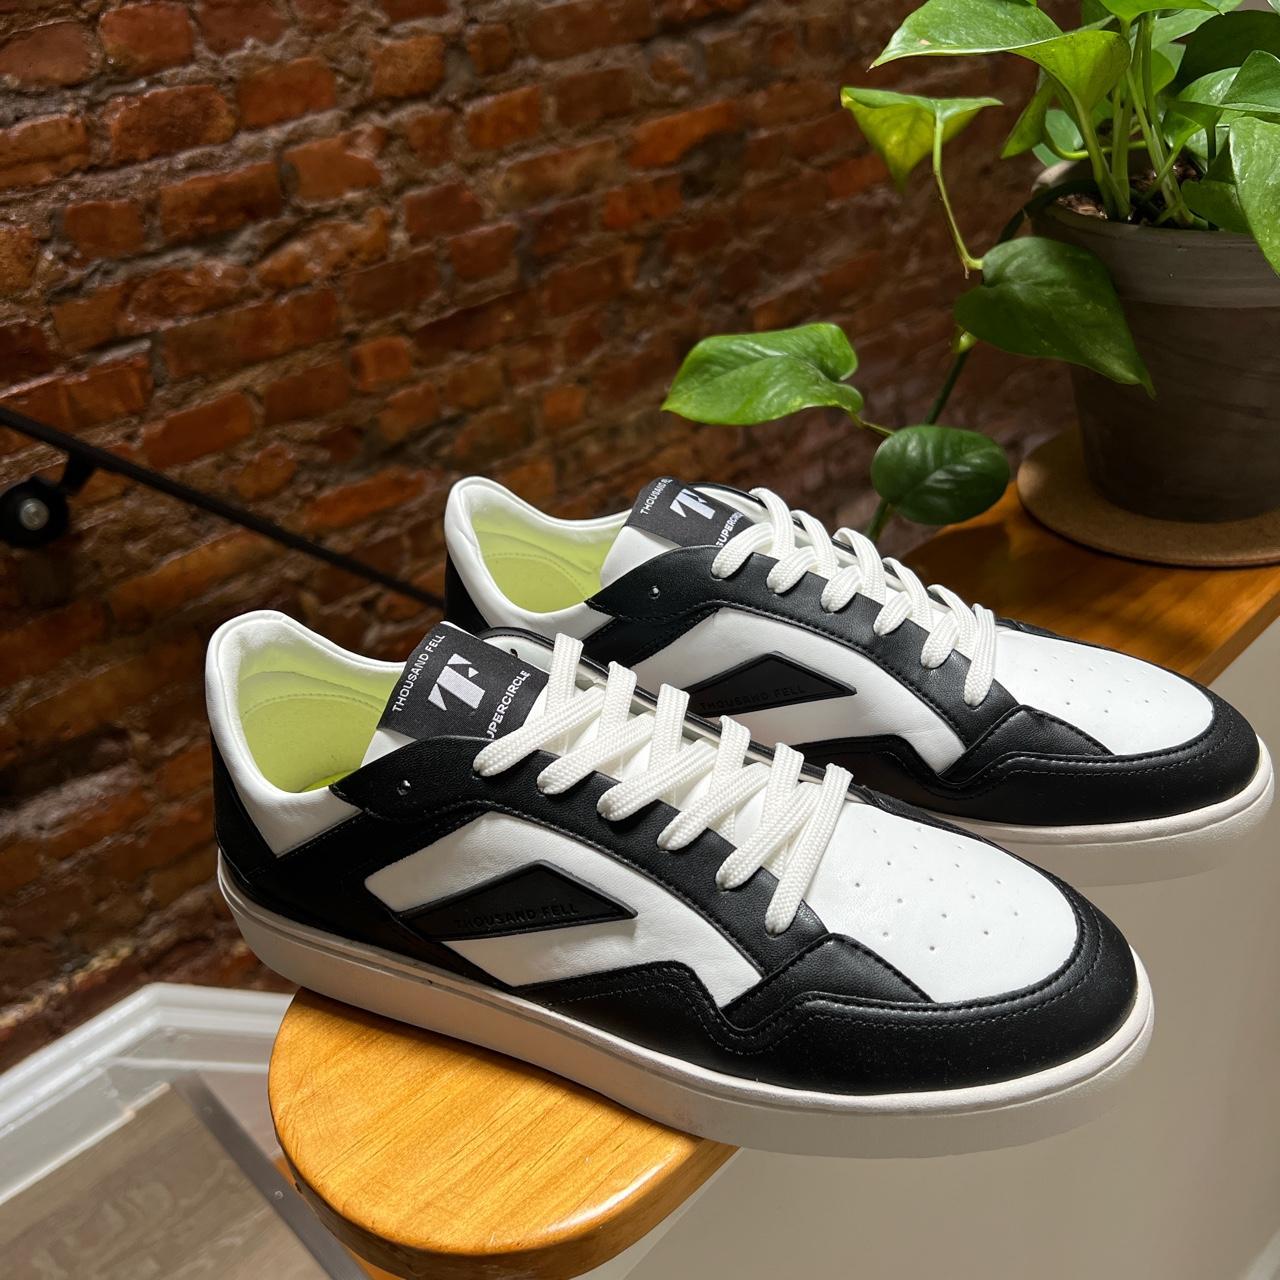 Product Image 1 - Thousand Fell sneakers in new